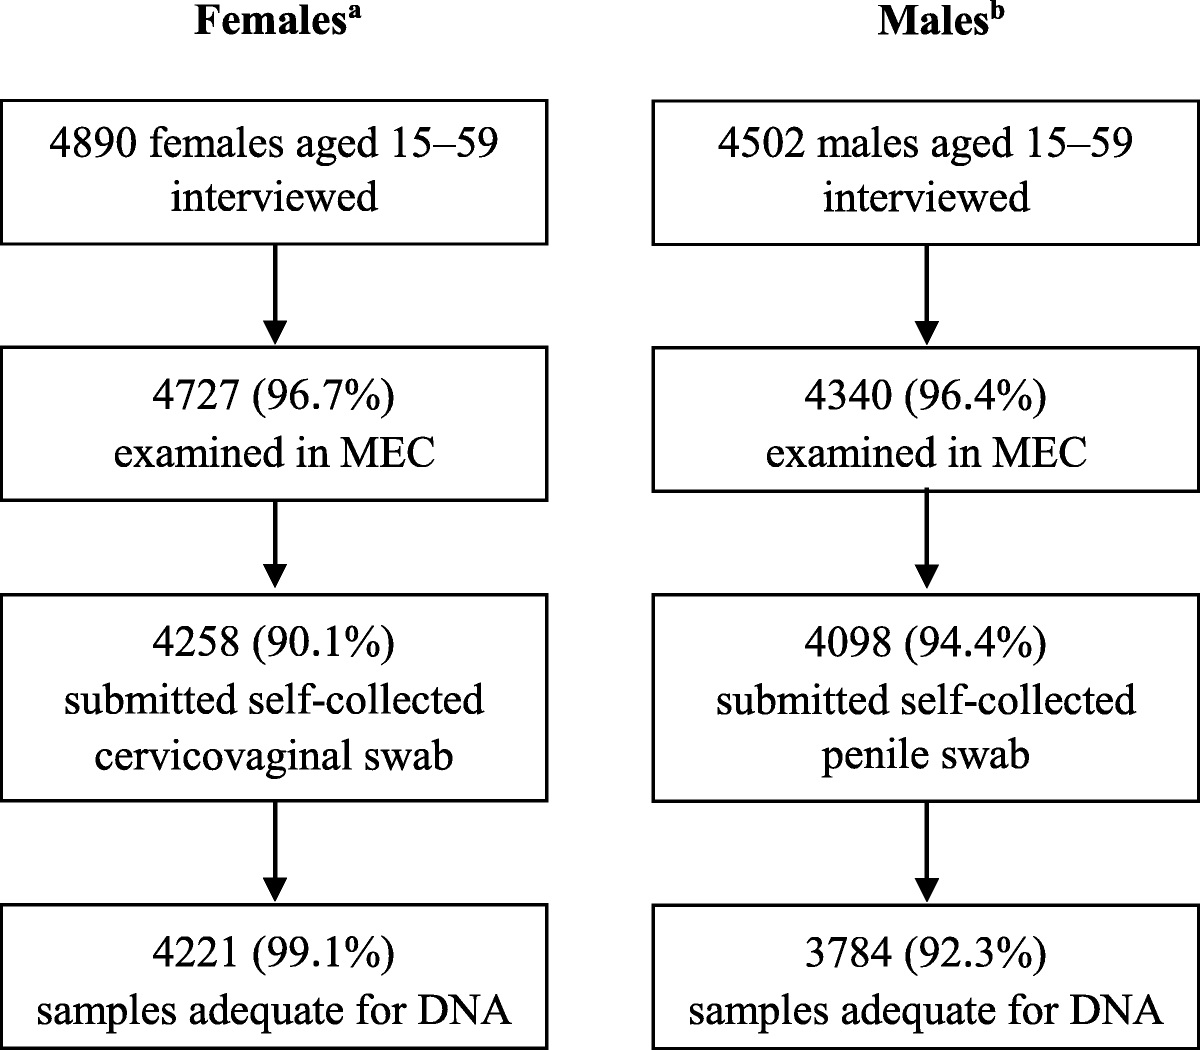 Genital Human Papillomavirus Prevalence Over the Lifespan Among Females and Males in a National Cross-Sectional Survey, United States, 2013–2016